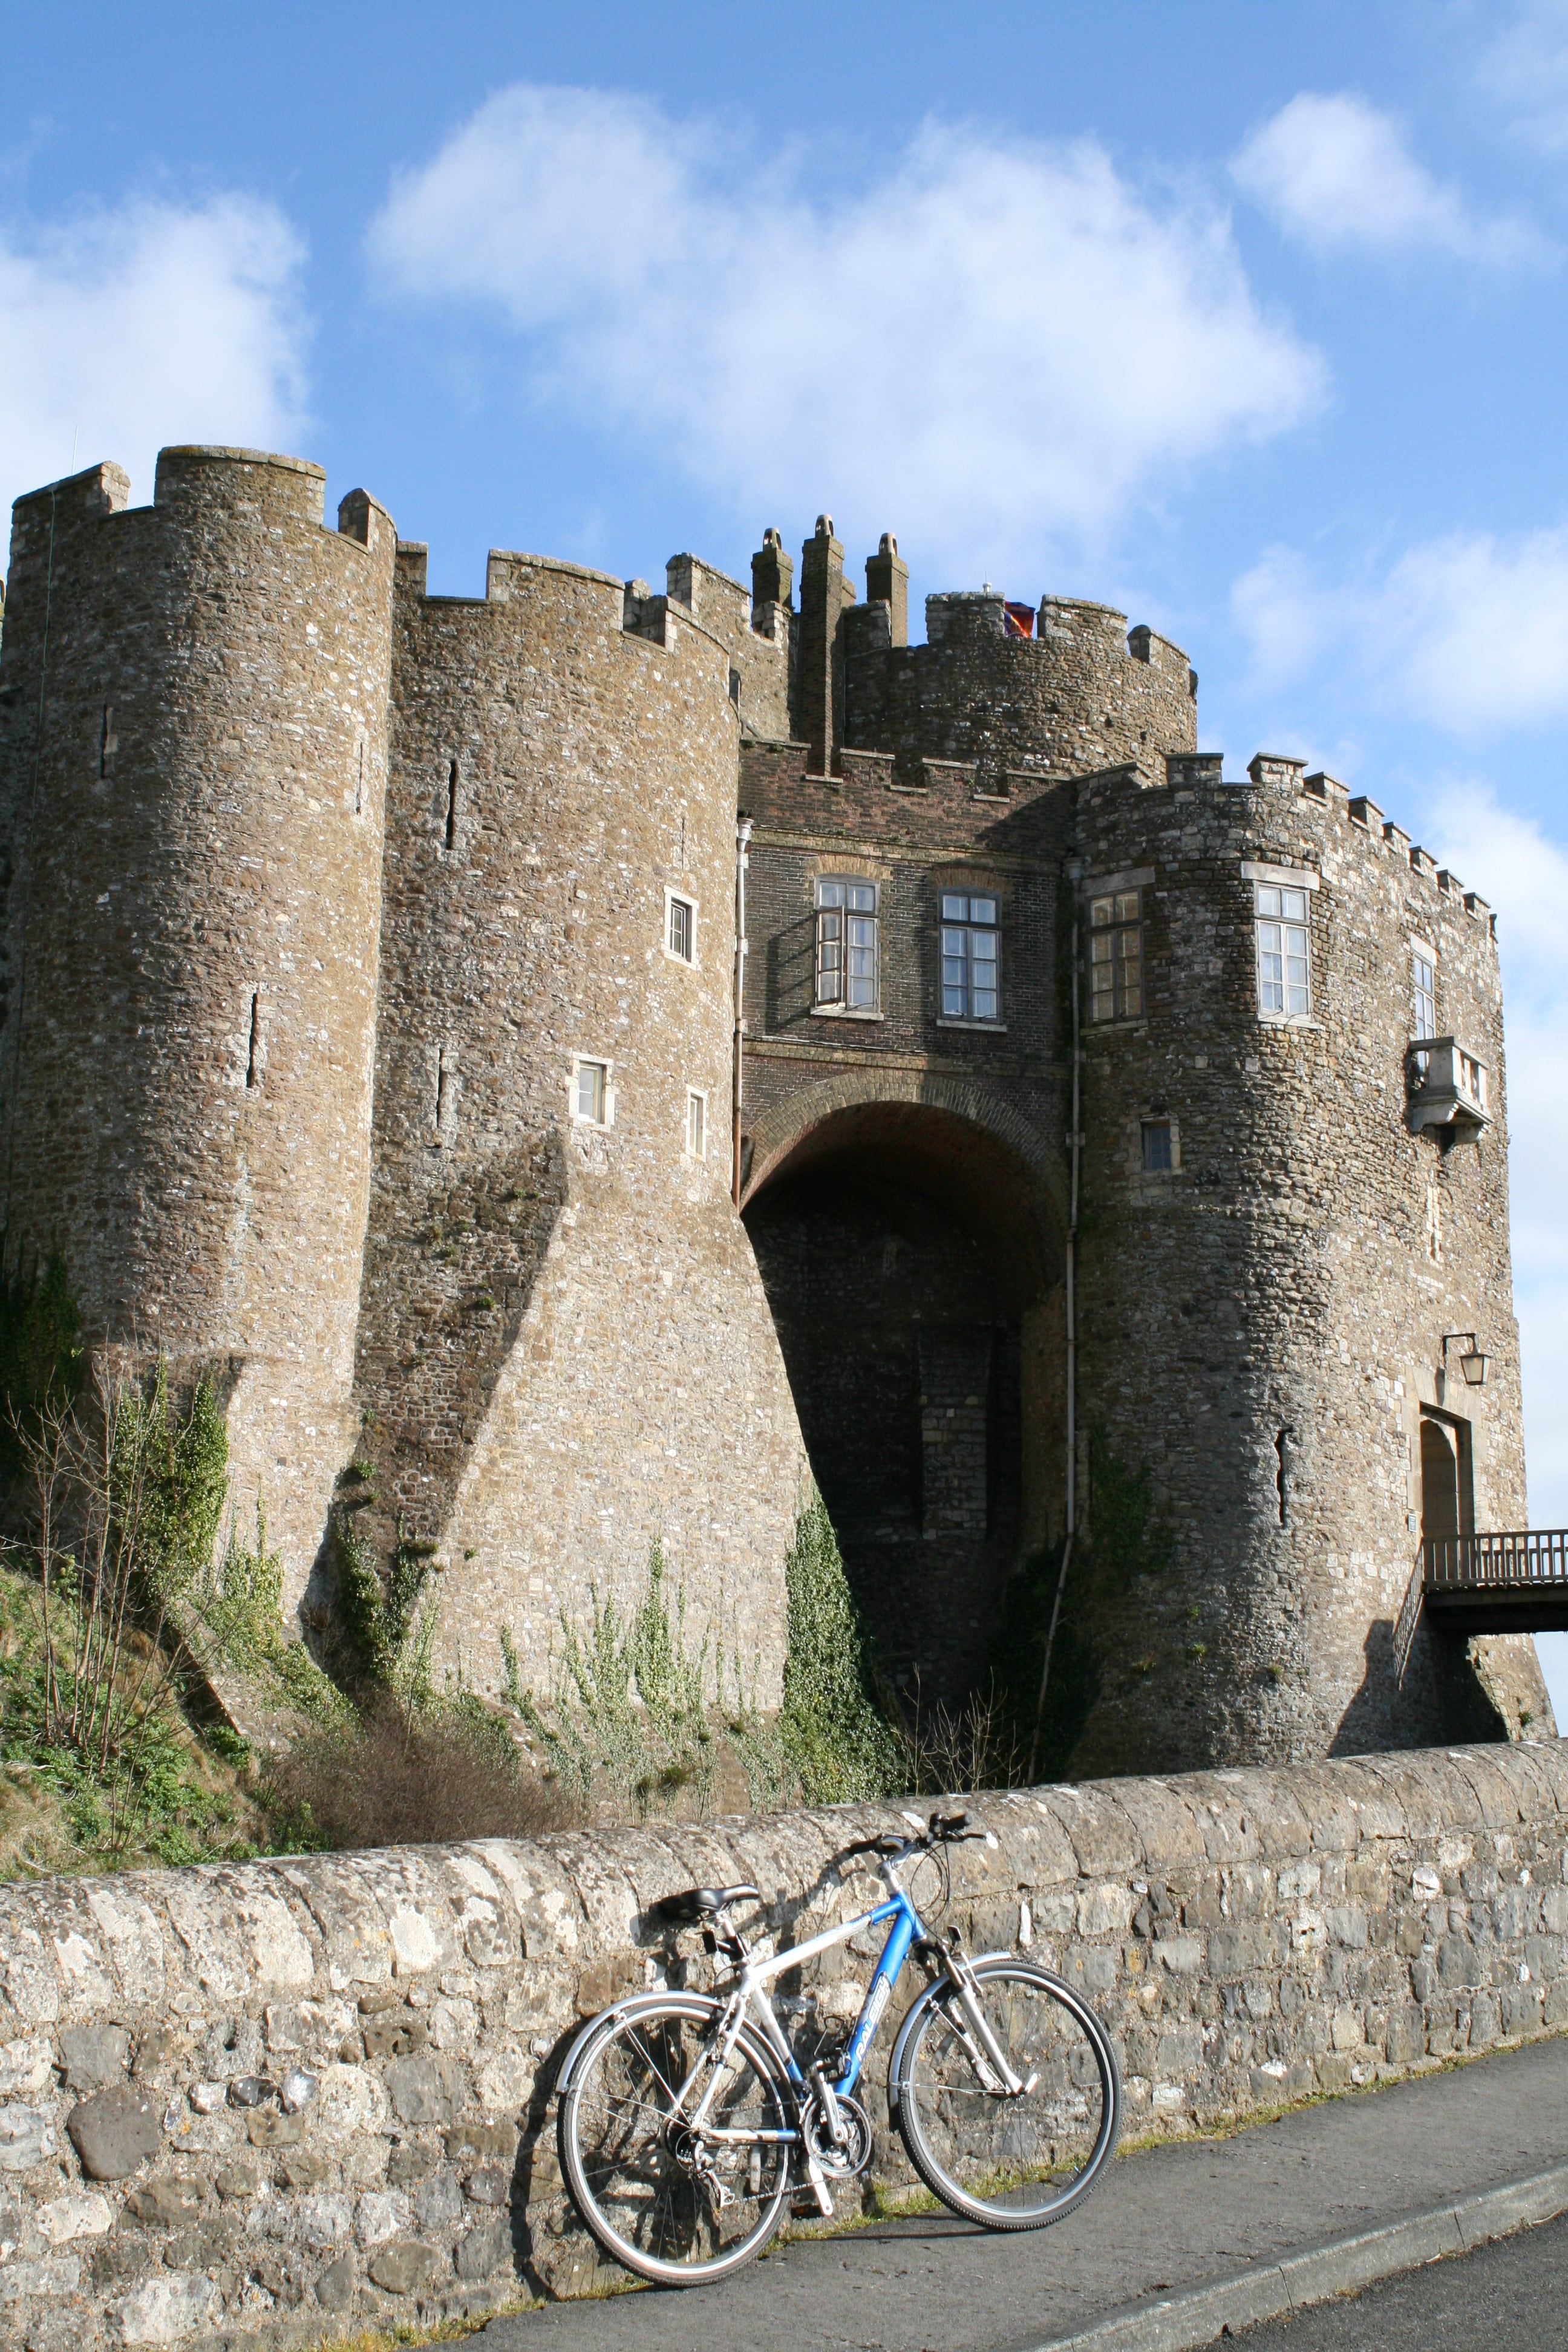 Bike leaning against stone wall, with Dover Castle in background on a sunny day. Credit David Young-Sustrans.